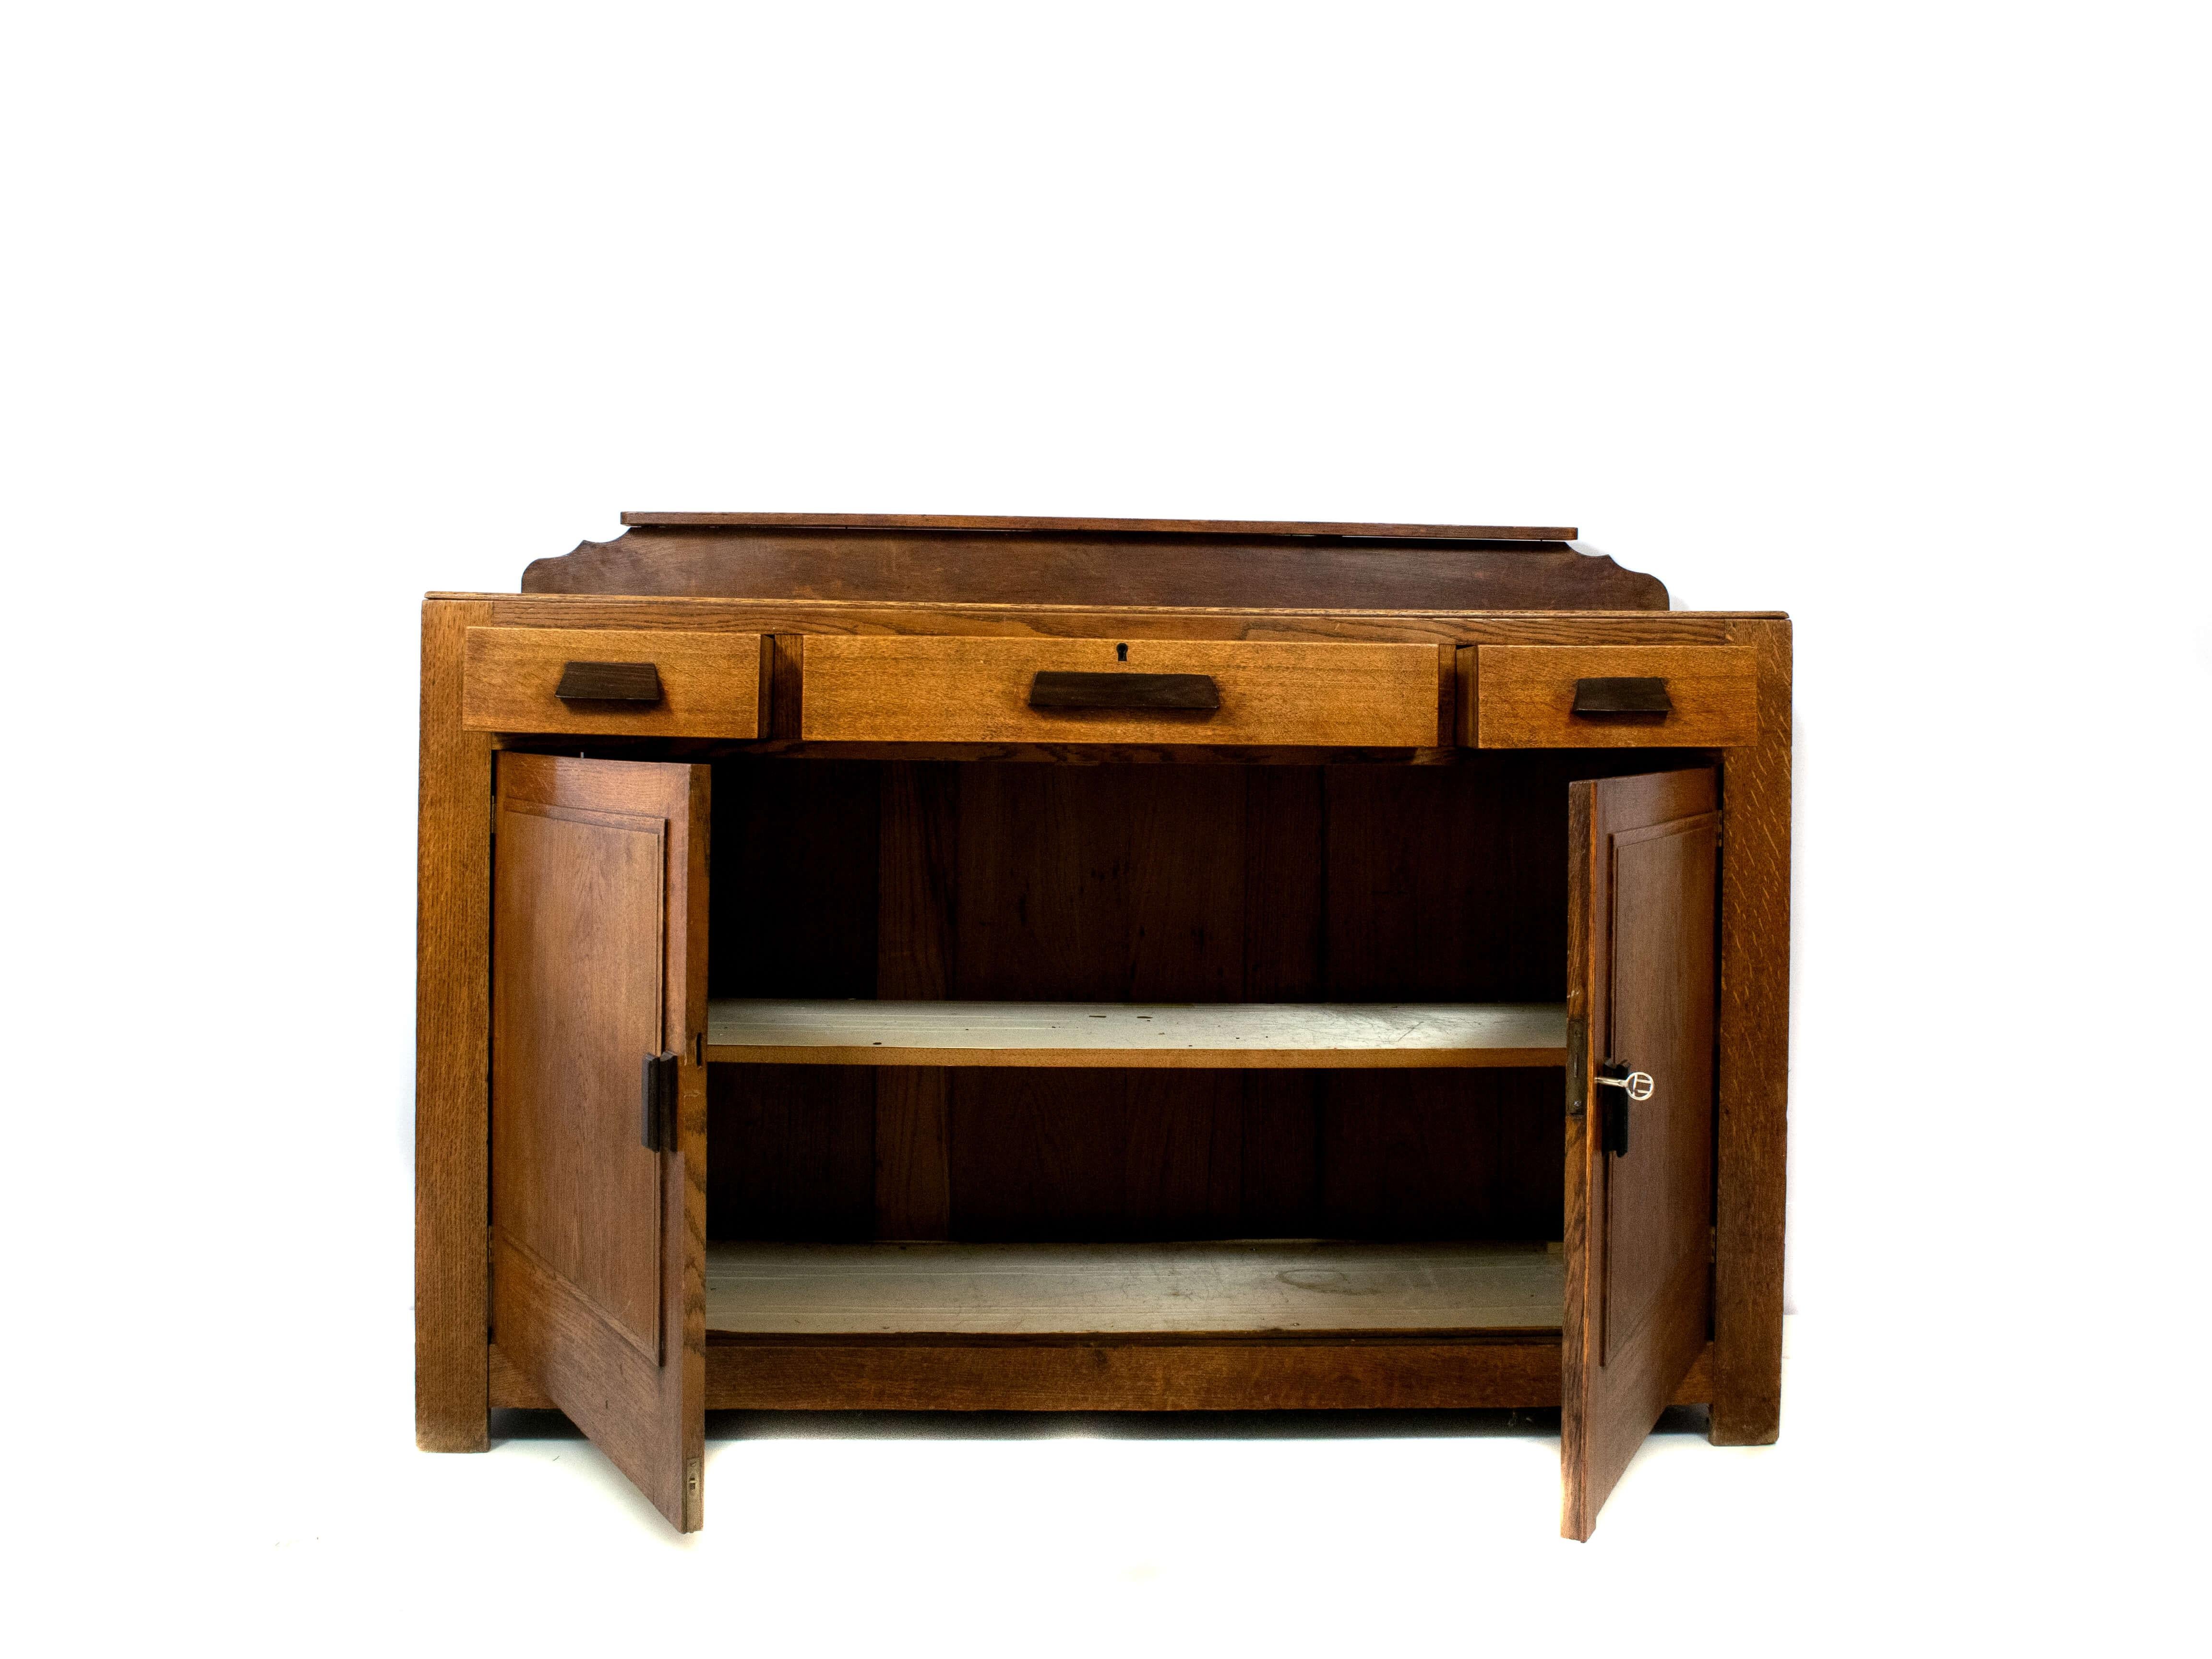 Minimalistic Amsterdam School dresser from the Netherlands, 1920s. This dresser in oak and coromandel handles is characterized by its simplicity and functionality. The craftsmanship is evident because of its solid construction and it has been made